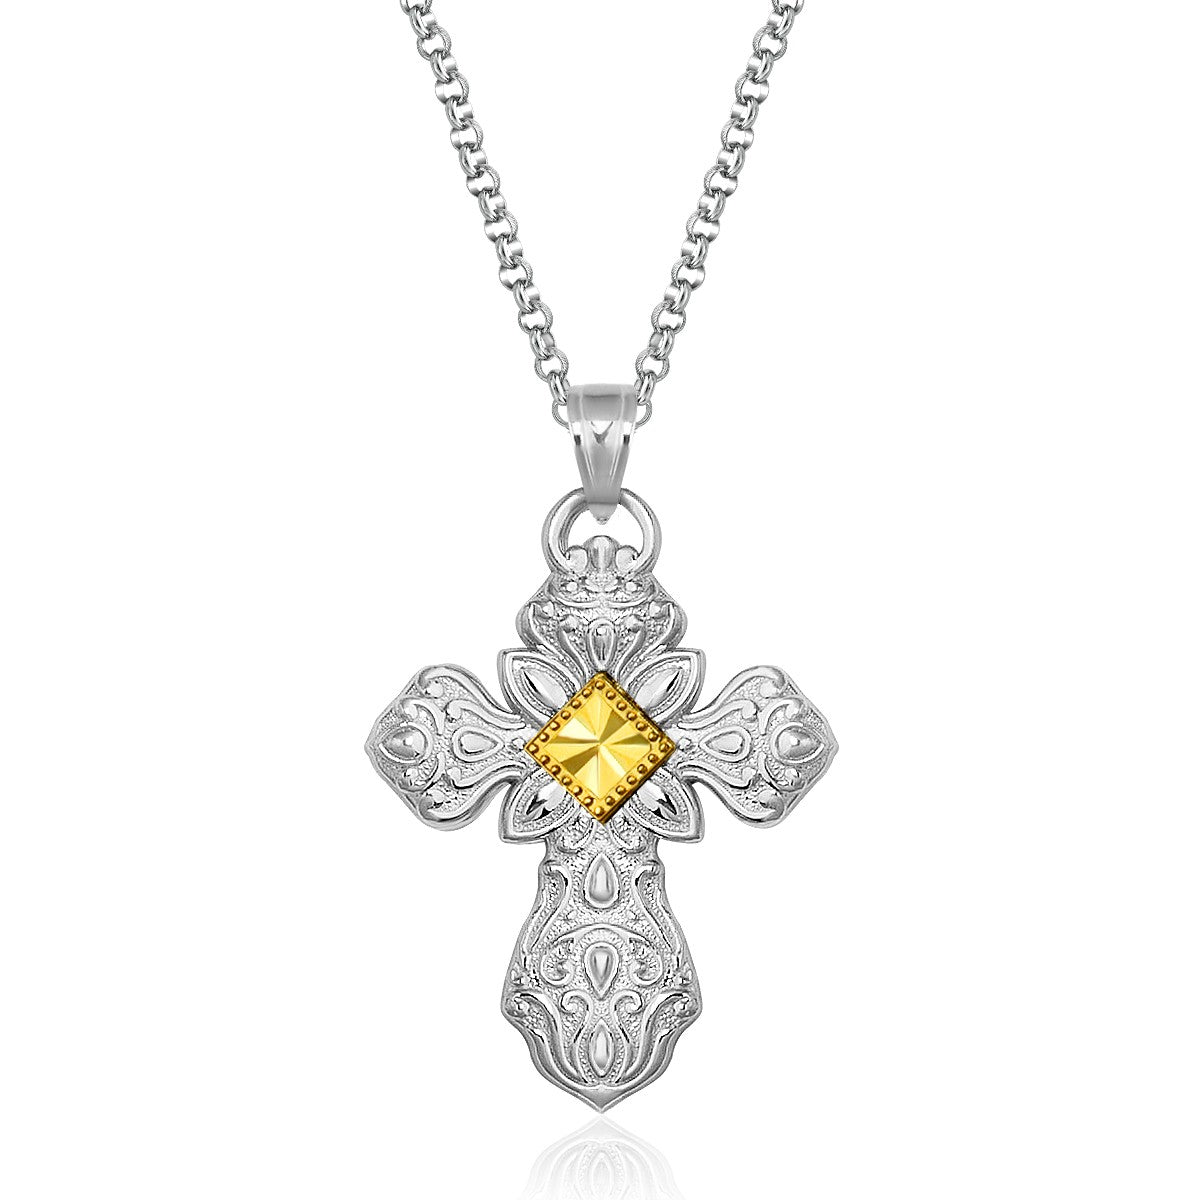 Designer Sterling Silver and 14K Yellow Gold Ornamental Cross Pendant